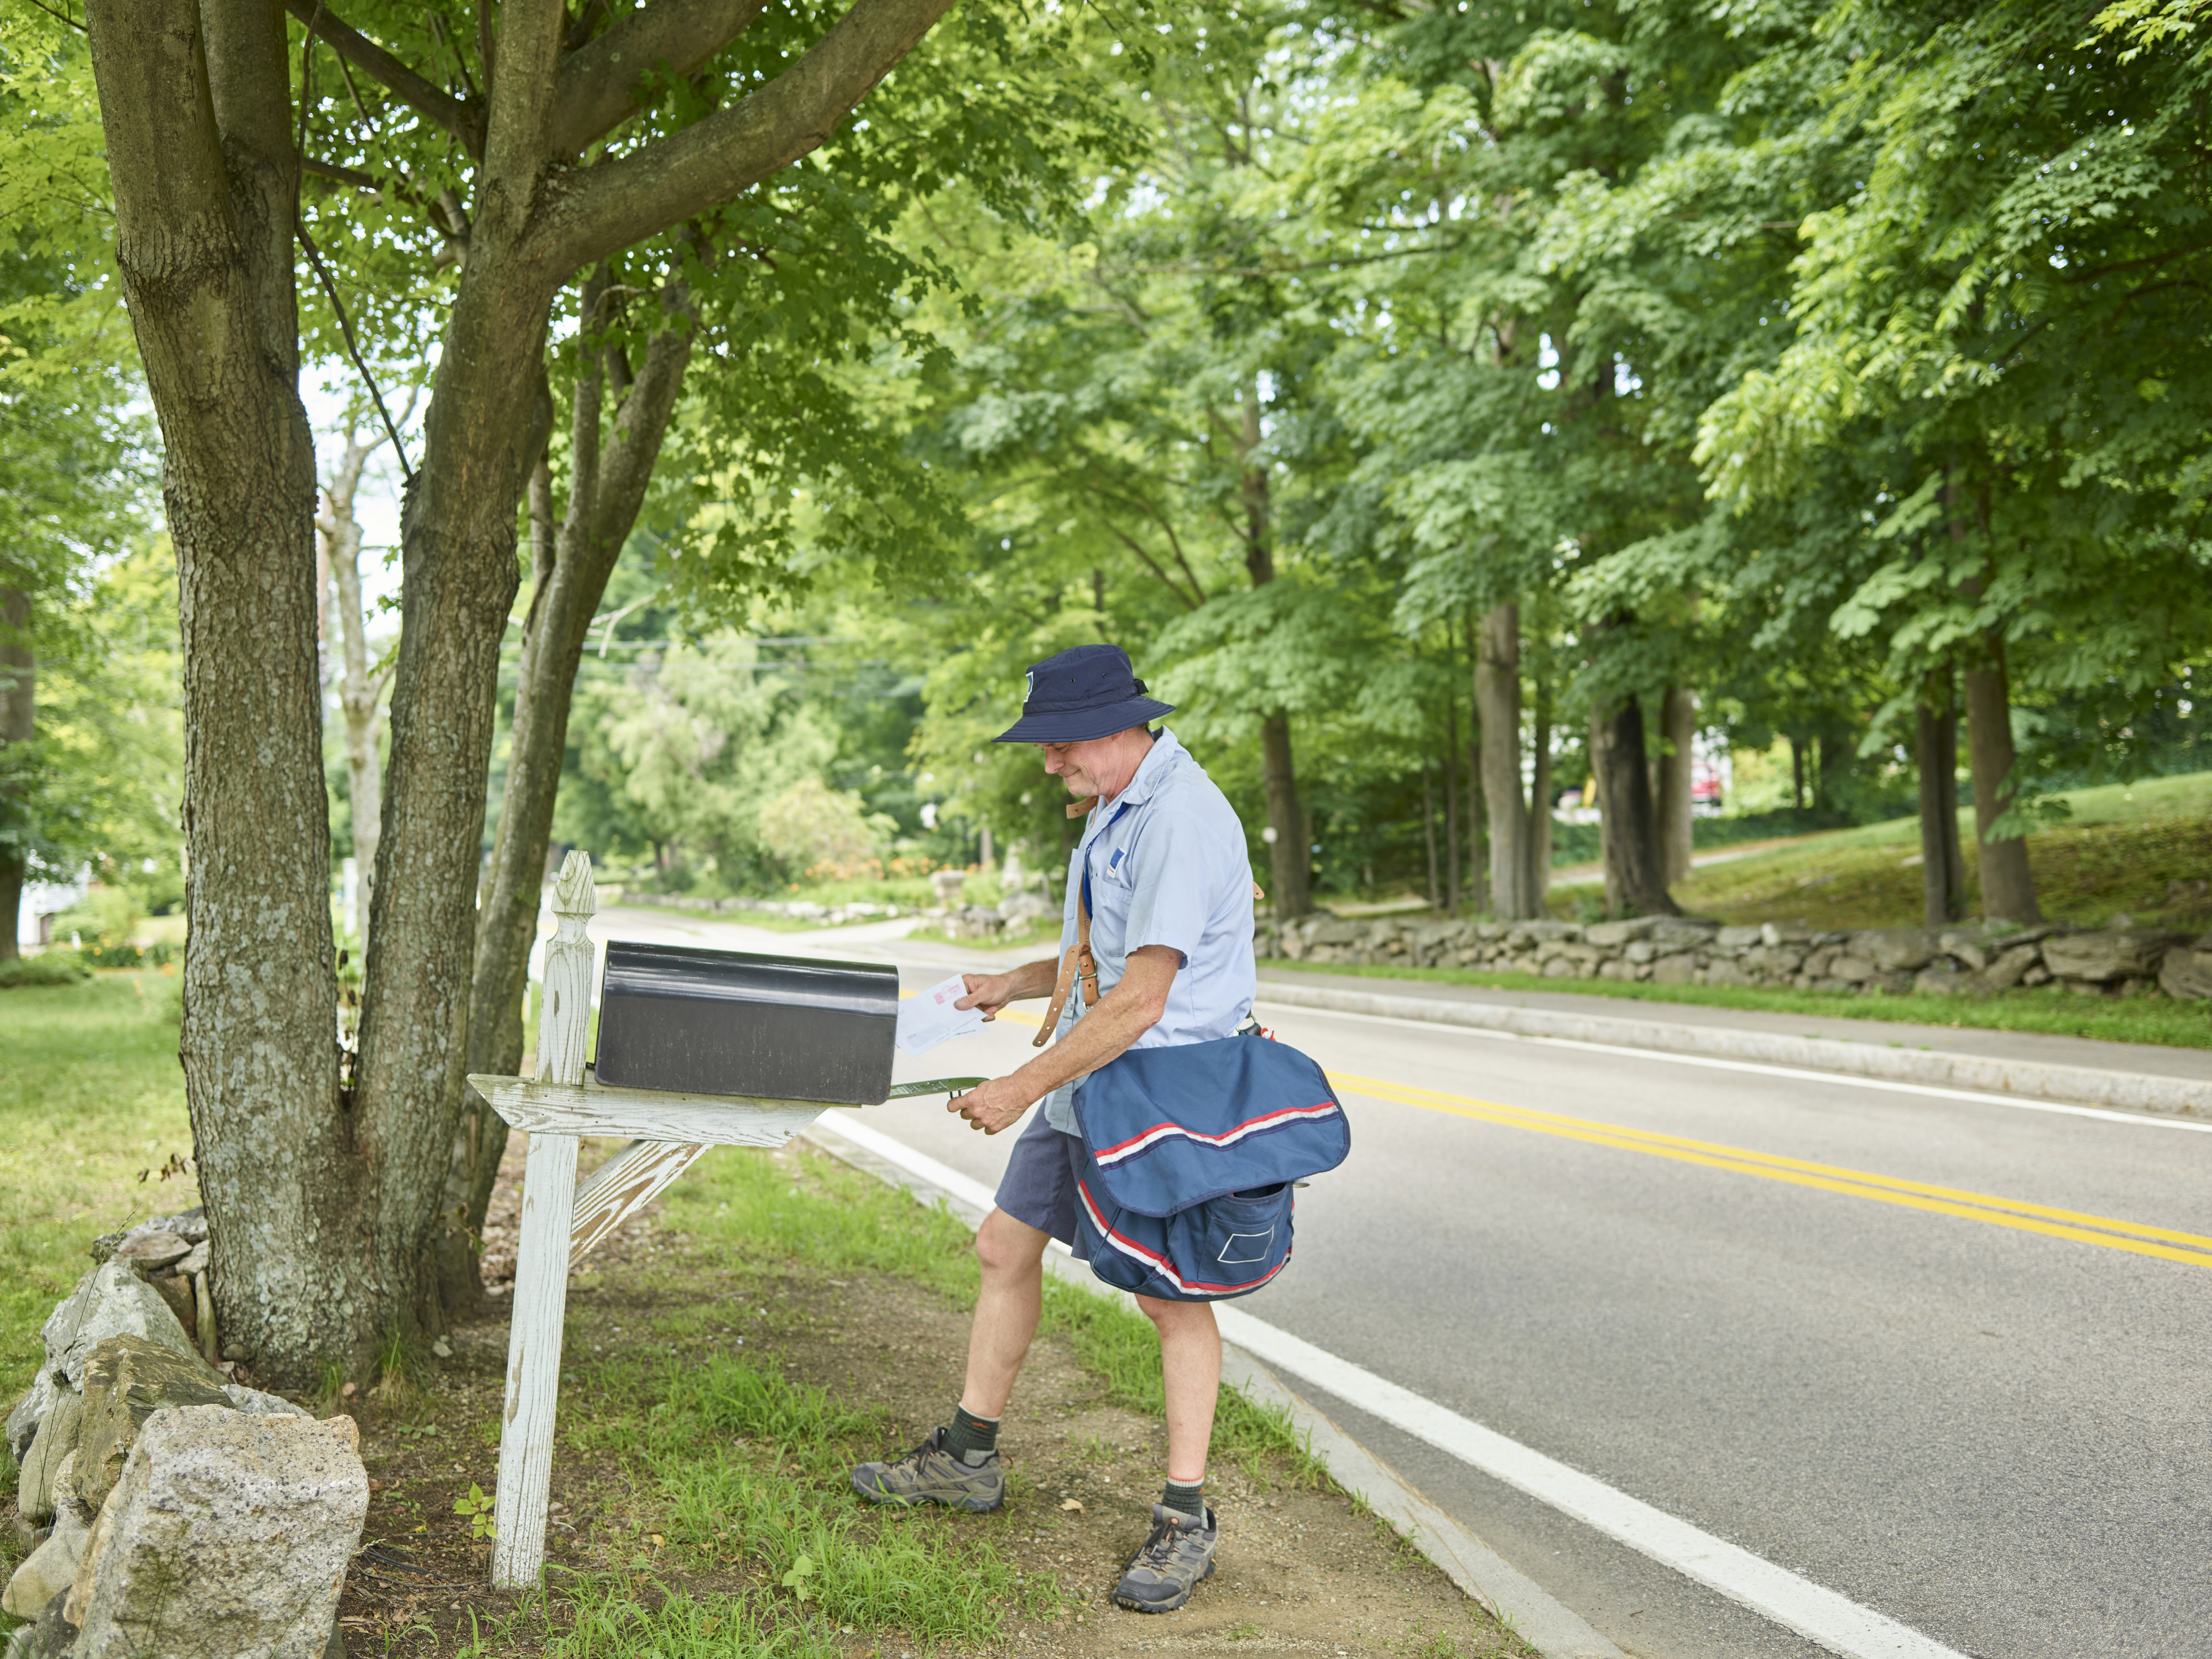 carrier putting a letter in a mailbox on a rural road